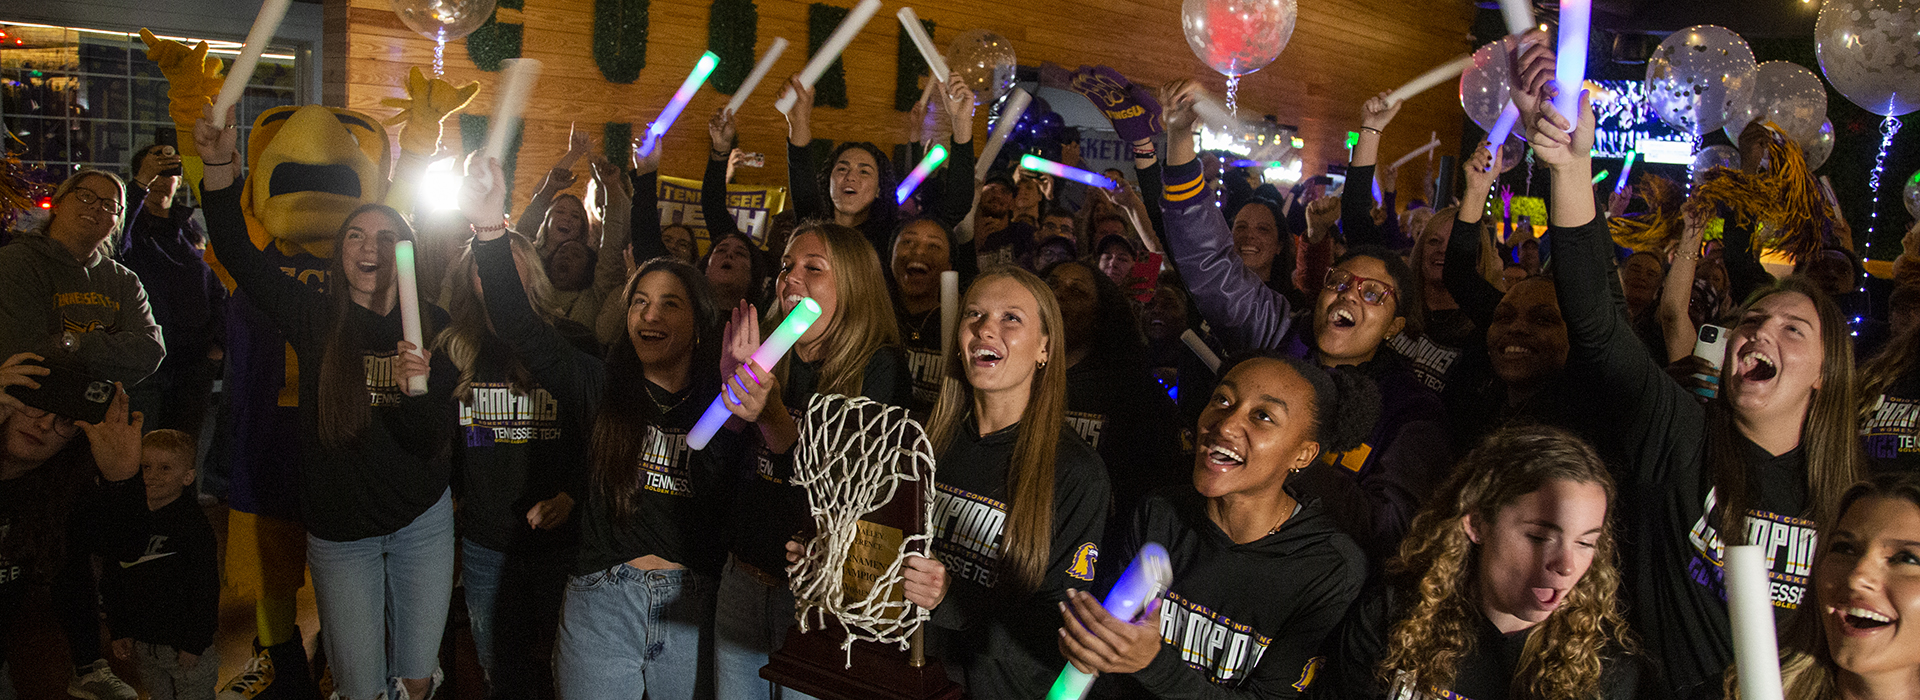 Golden Eagle women to take on Monmouth in NCAA First Four matchup